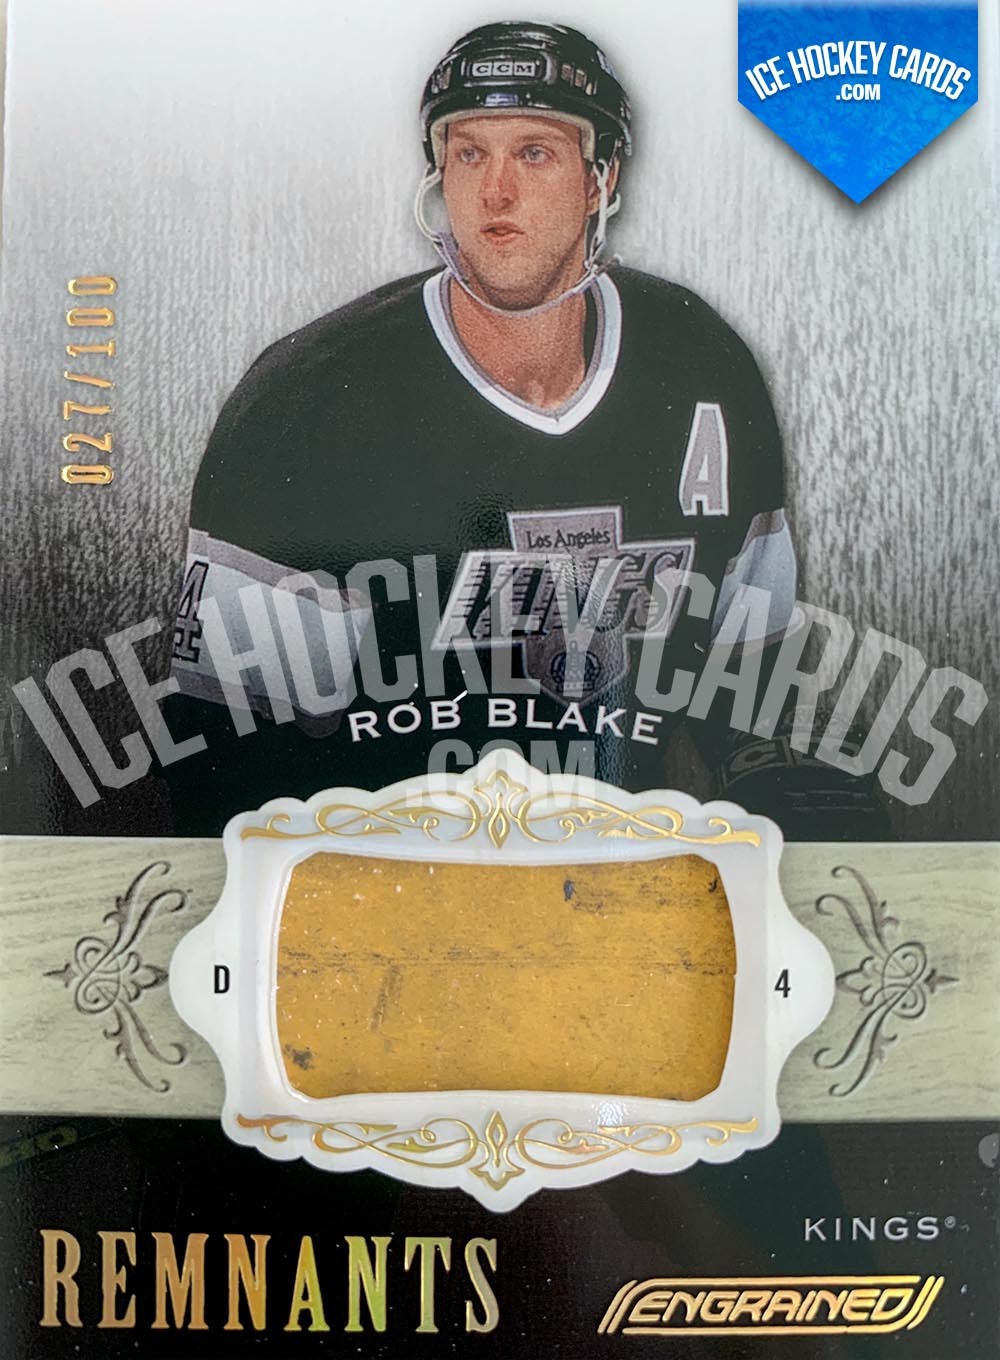 Upper Deck - Engrained 2018-19 - Rob Blake The Alumni Remnants Sticks Game-Used # to 100